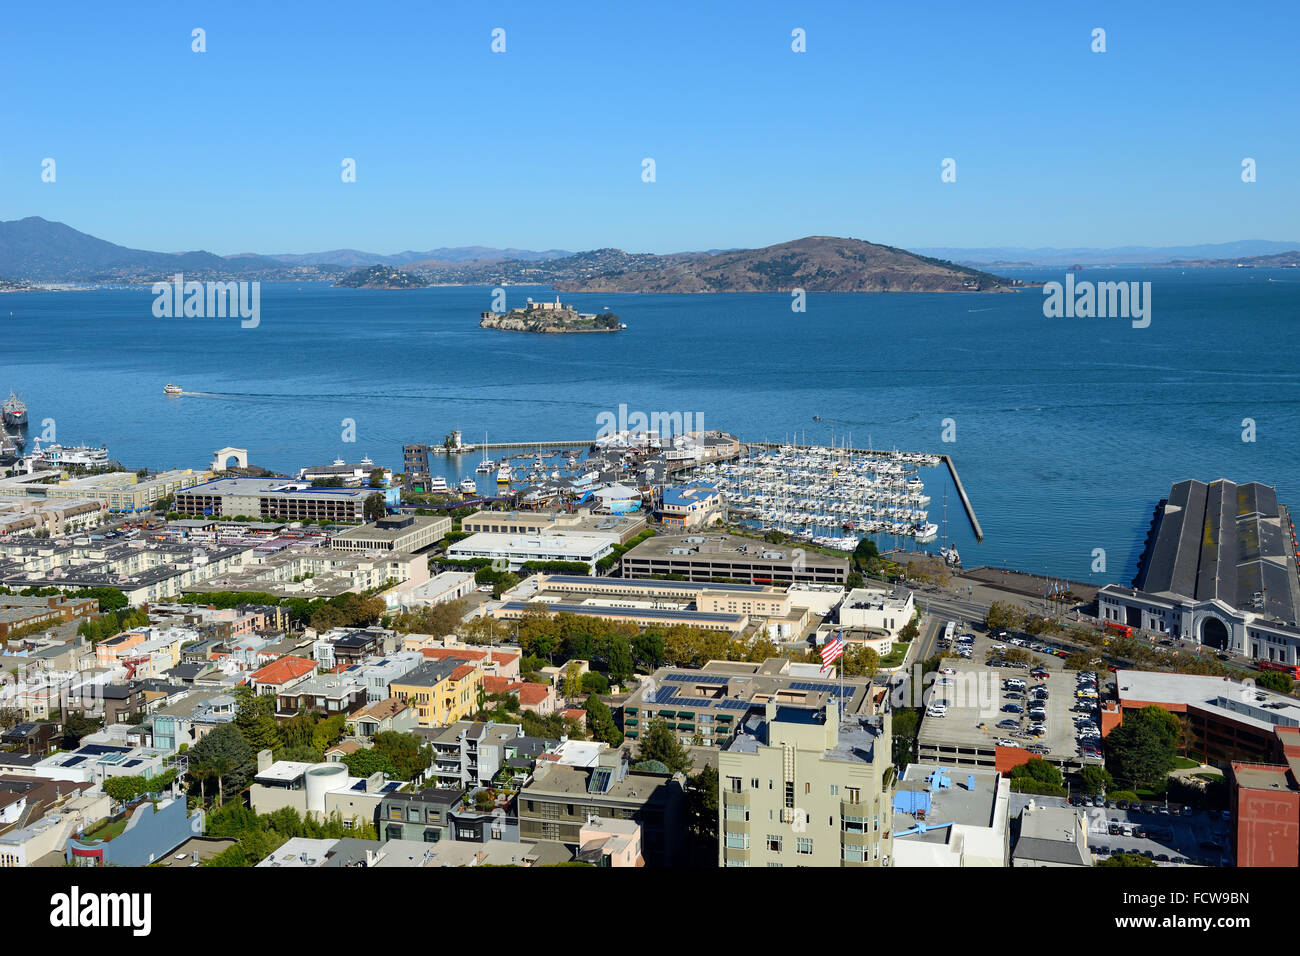 Elevated view of Marina and Alcatraz Island from Coit Tower on Telegraph Hill, San Francisco, California, USA Stock Photo